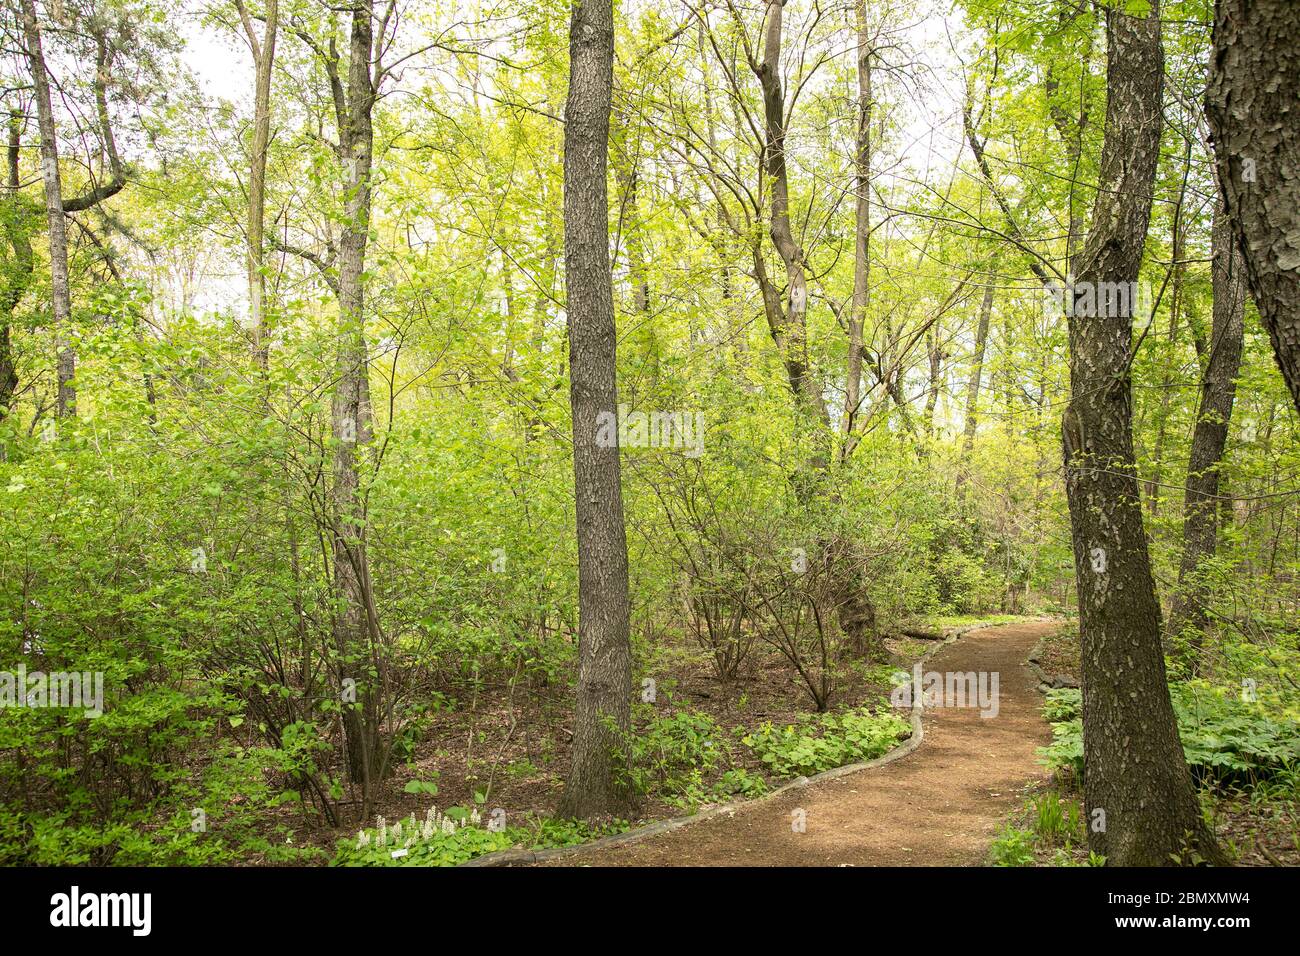 Spring in the Hallett Nature Sanctuary in Central Park, New York City. Stock Photo